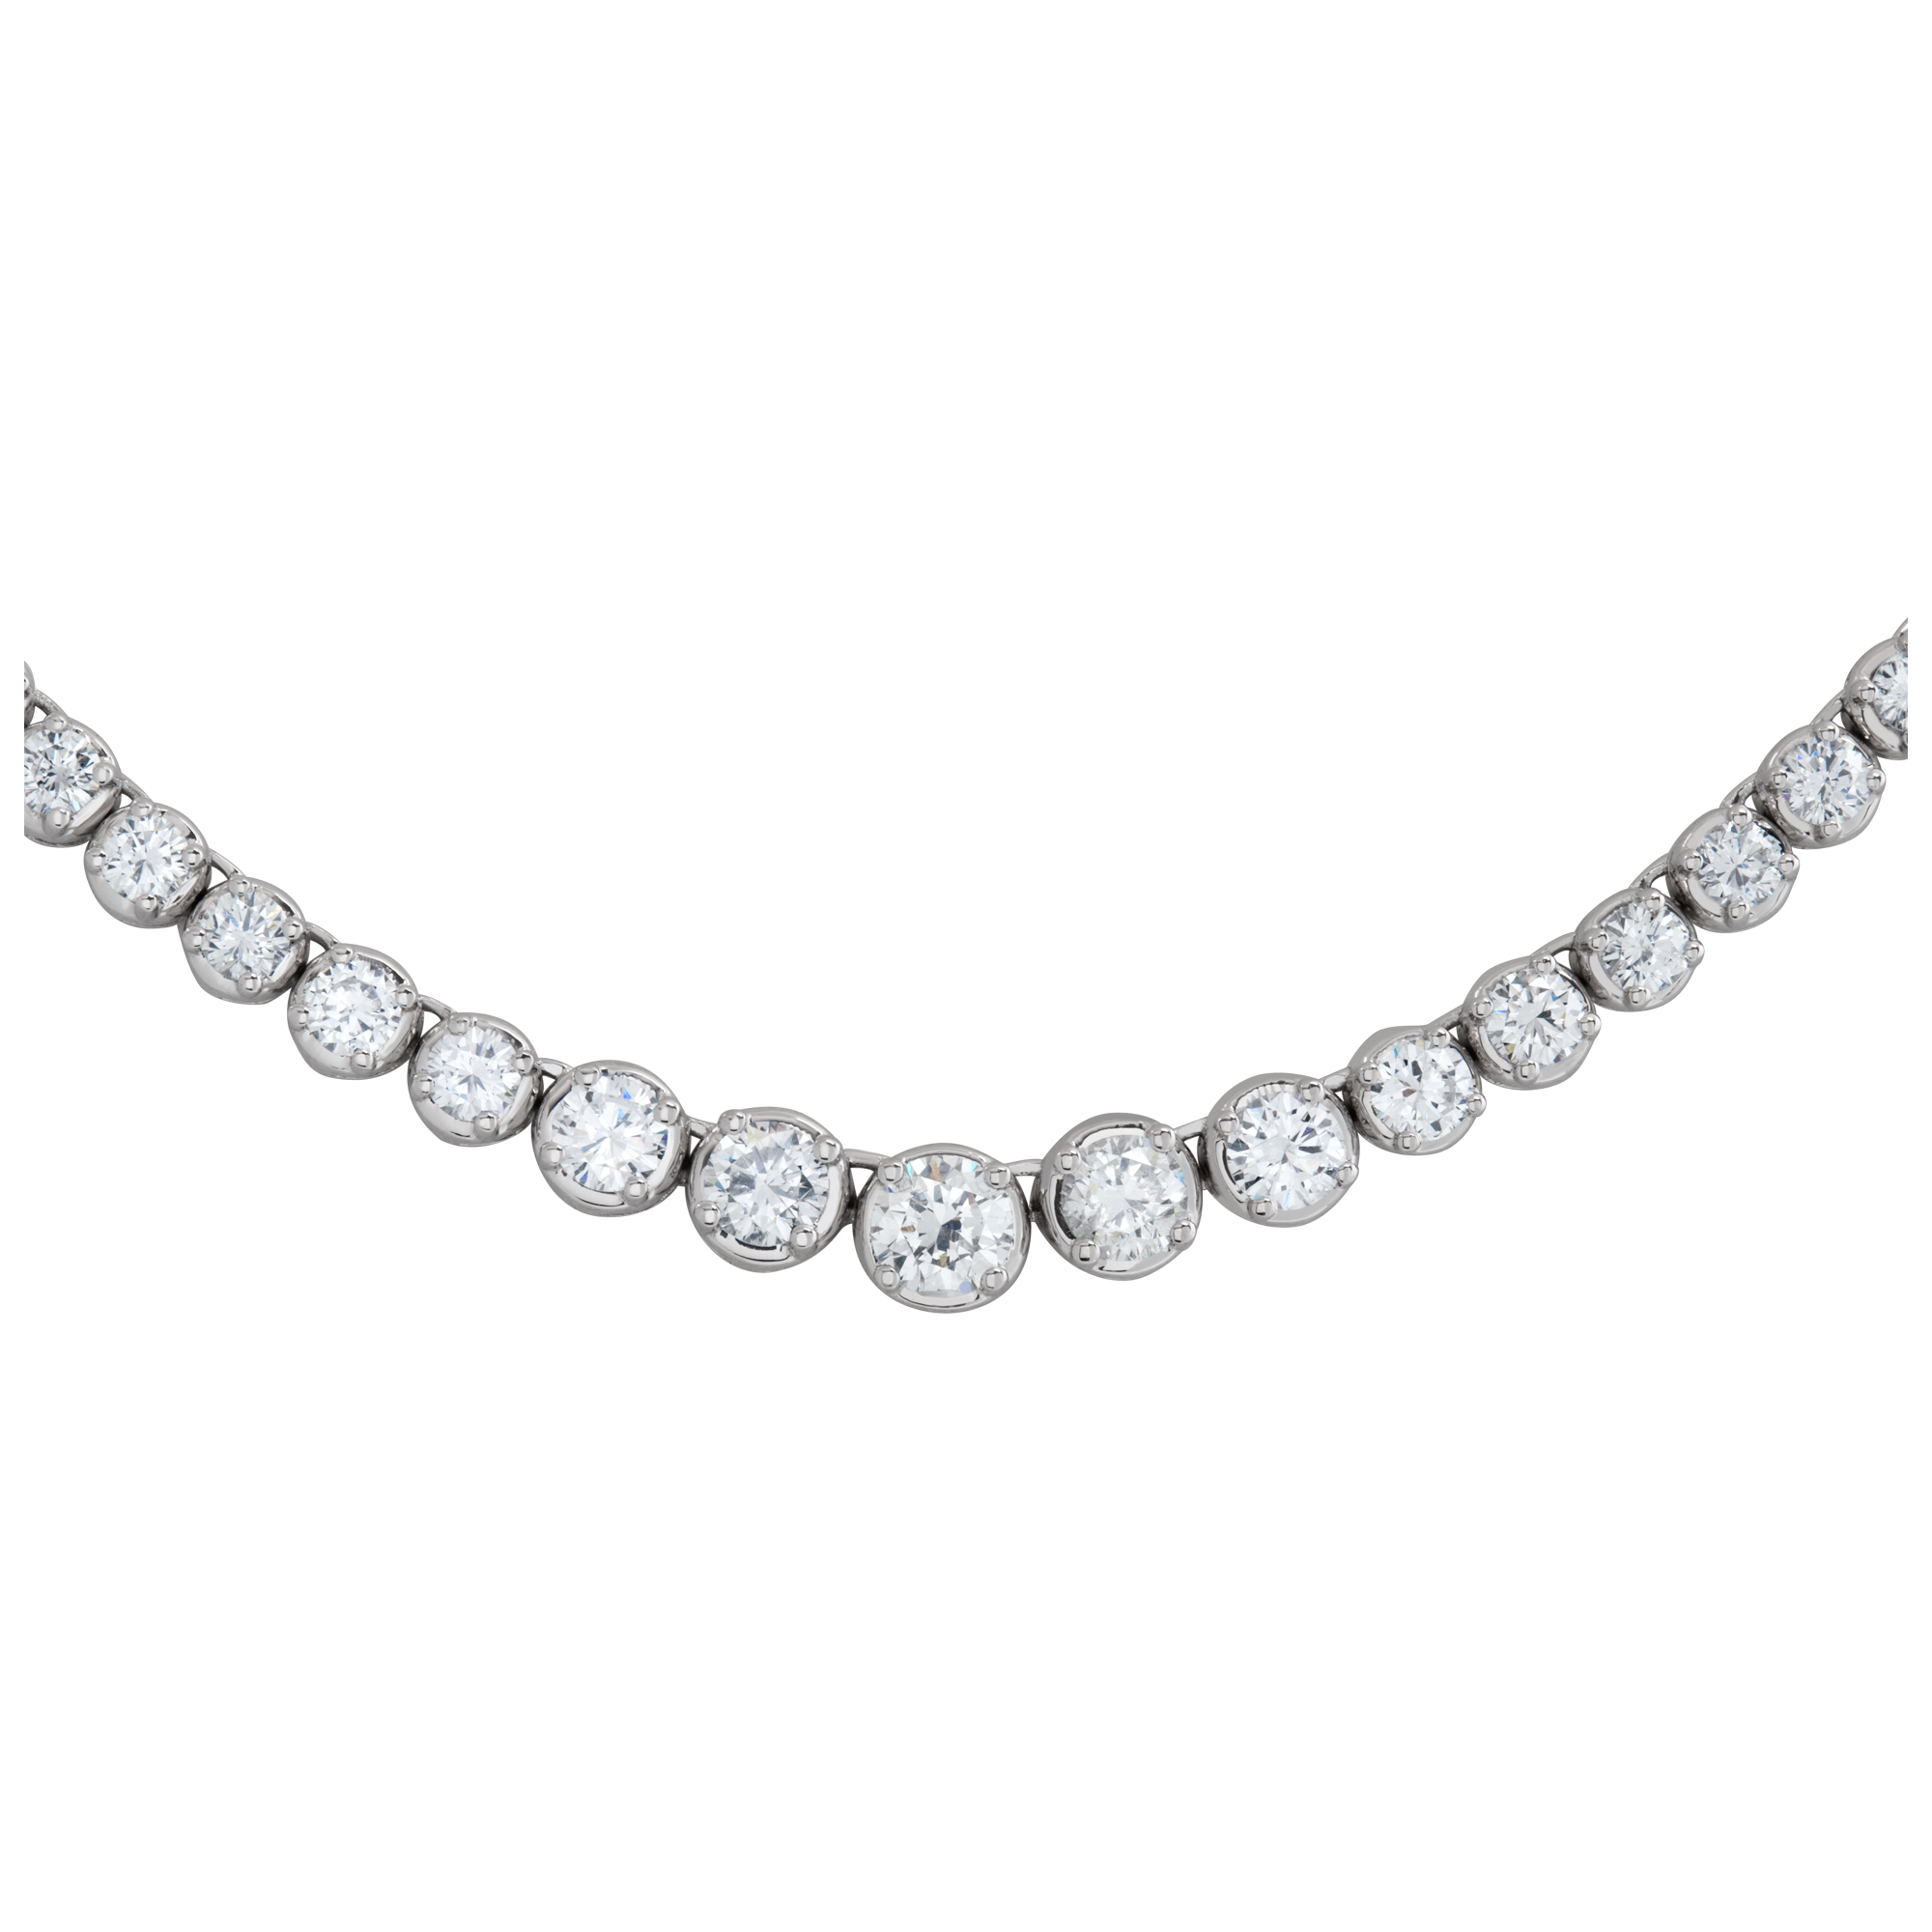 Diamond line necklace with aprox 6.00 carats round brilliant cut diamonds set in 18k white gold image 1